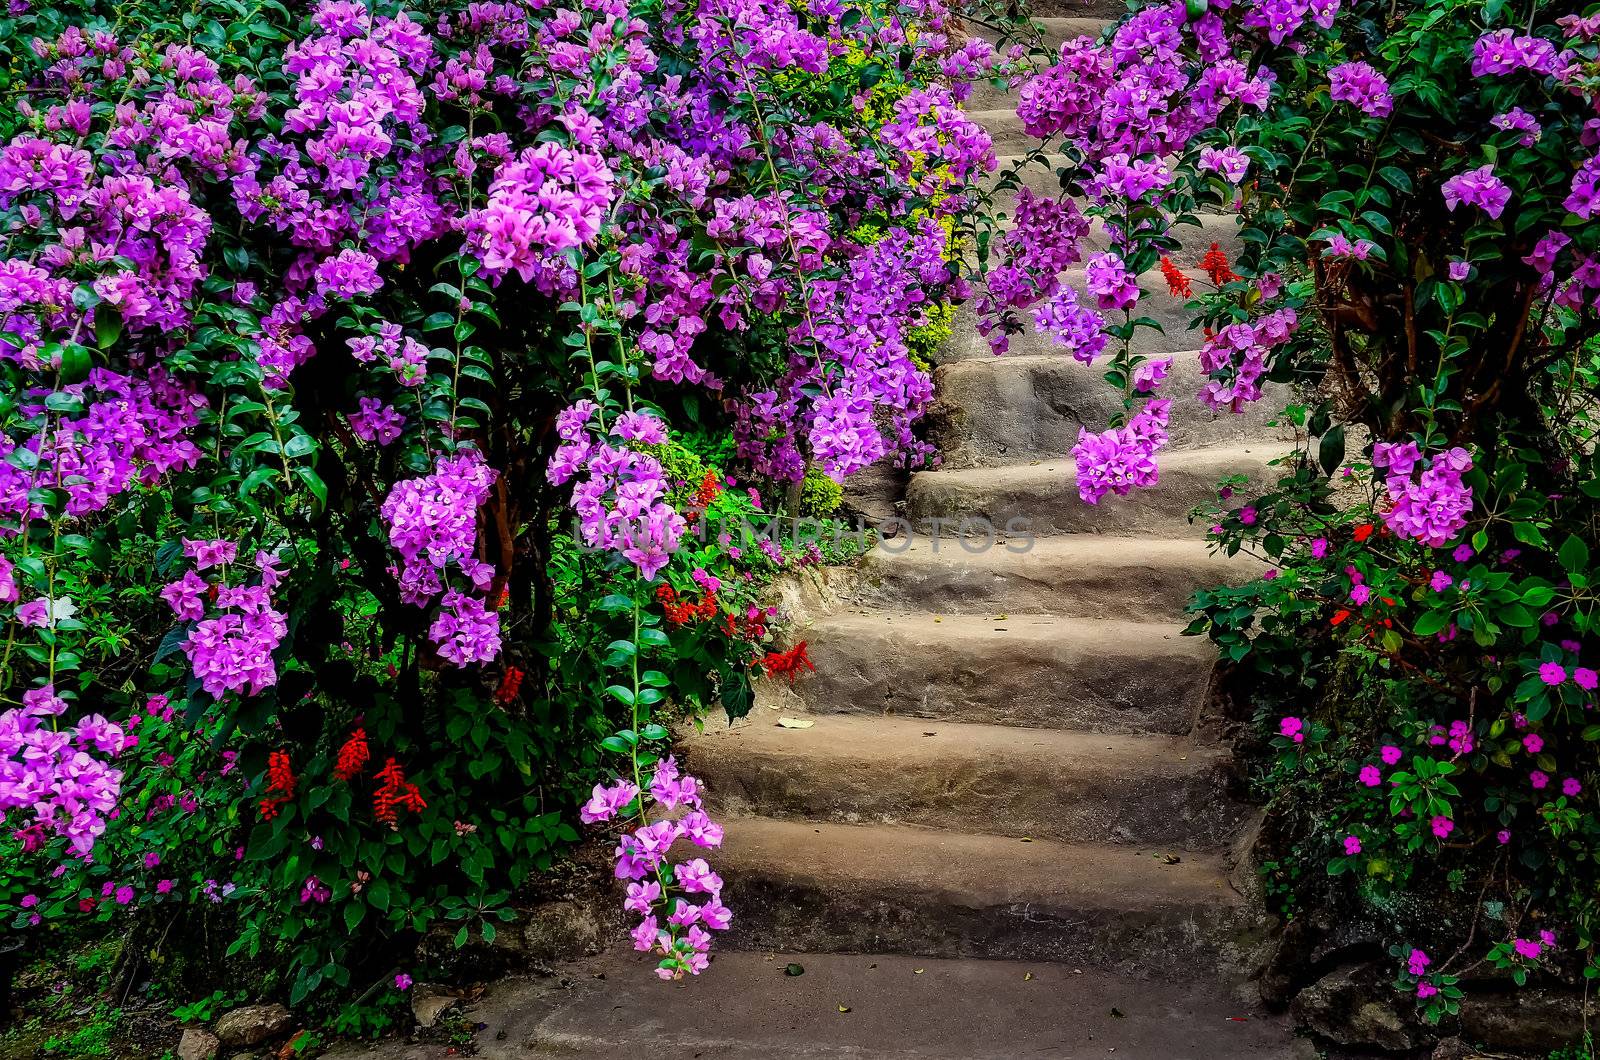 Beautiful colorful flowers in blossom and old garden stairway